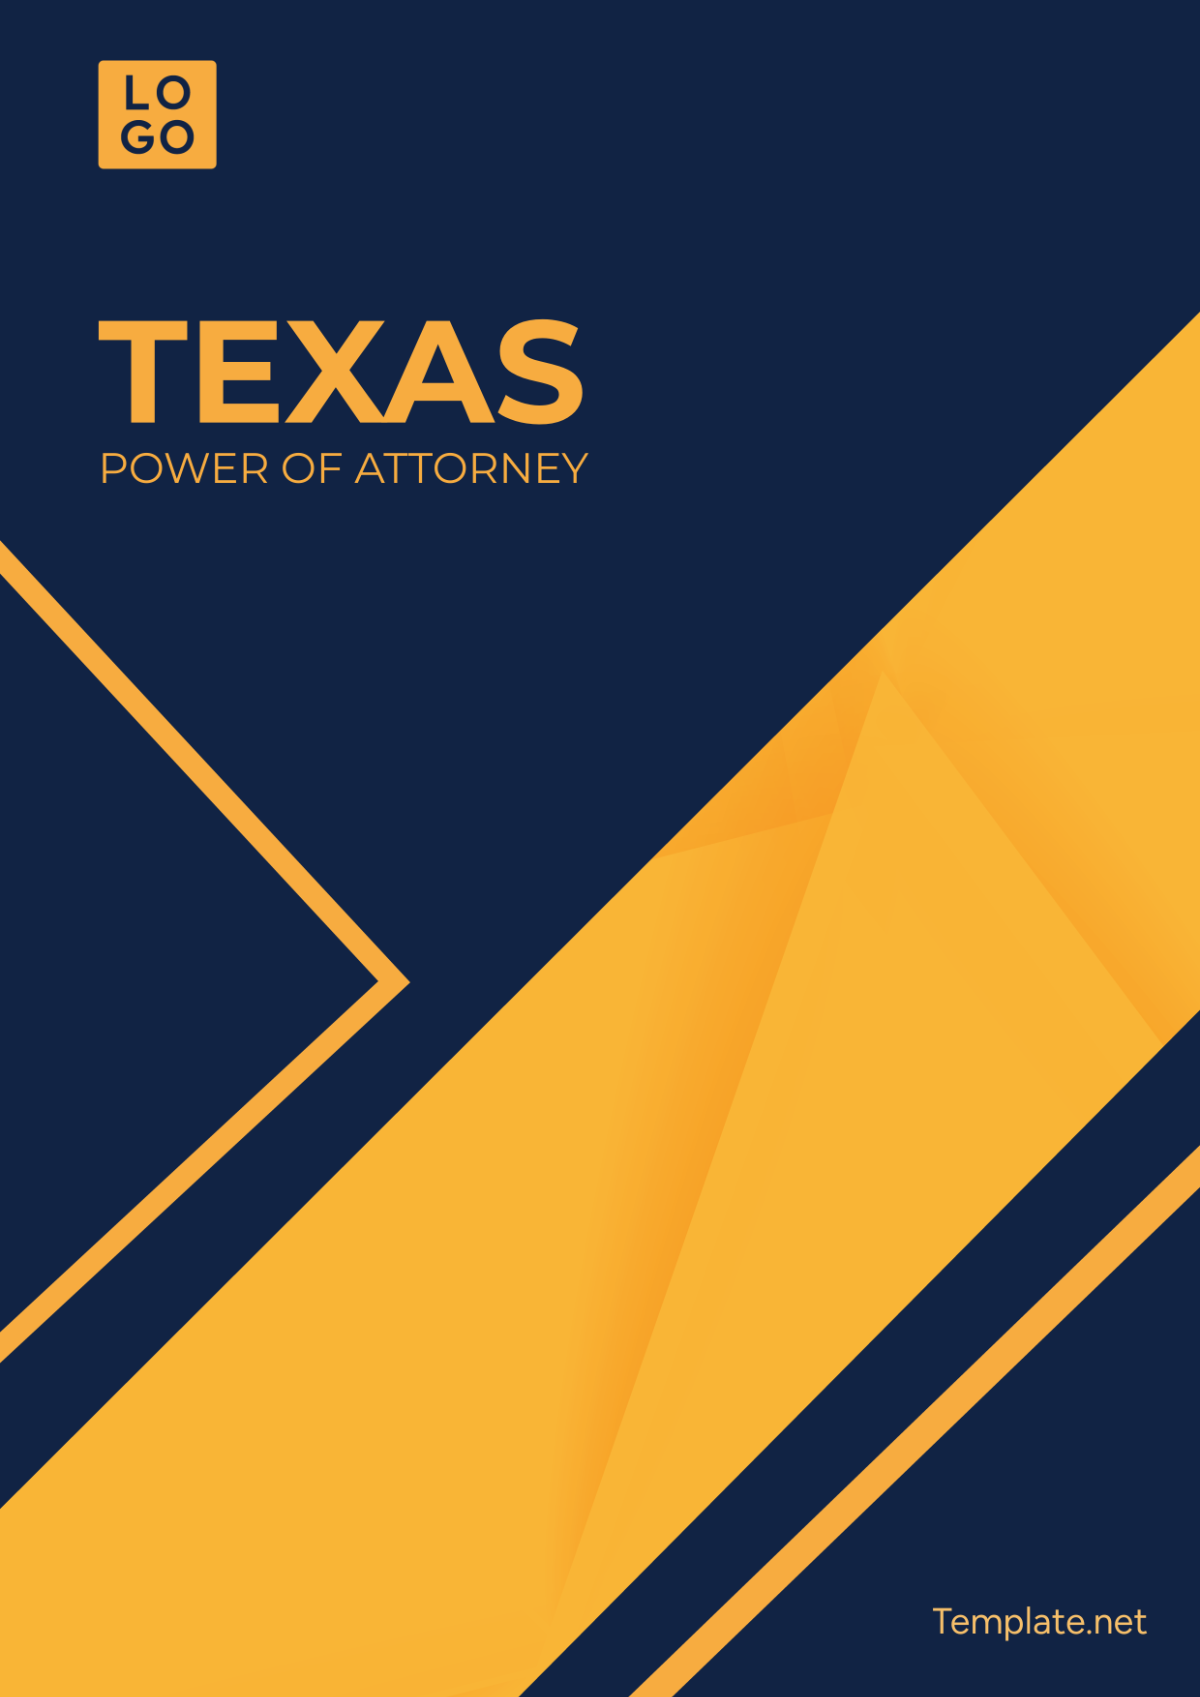 Texas Power of Attorney Cover Page